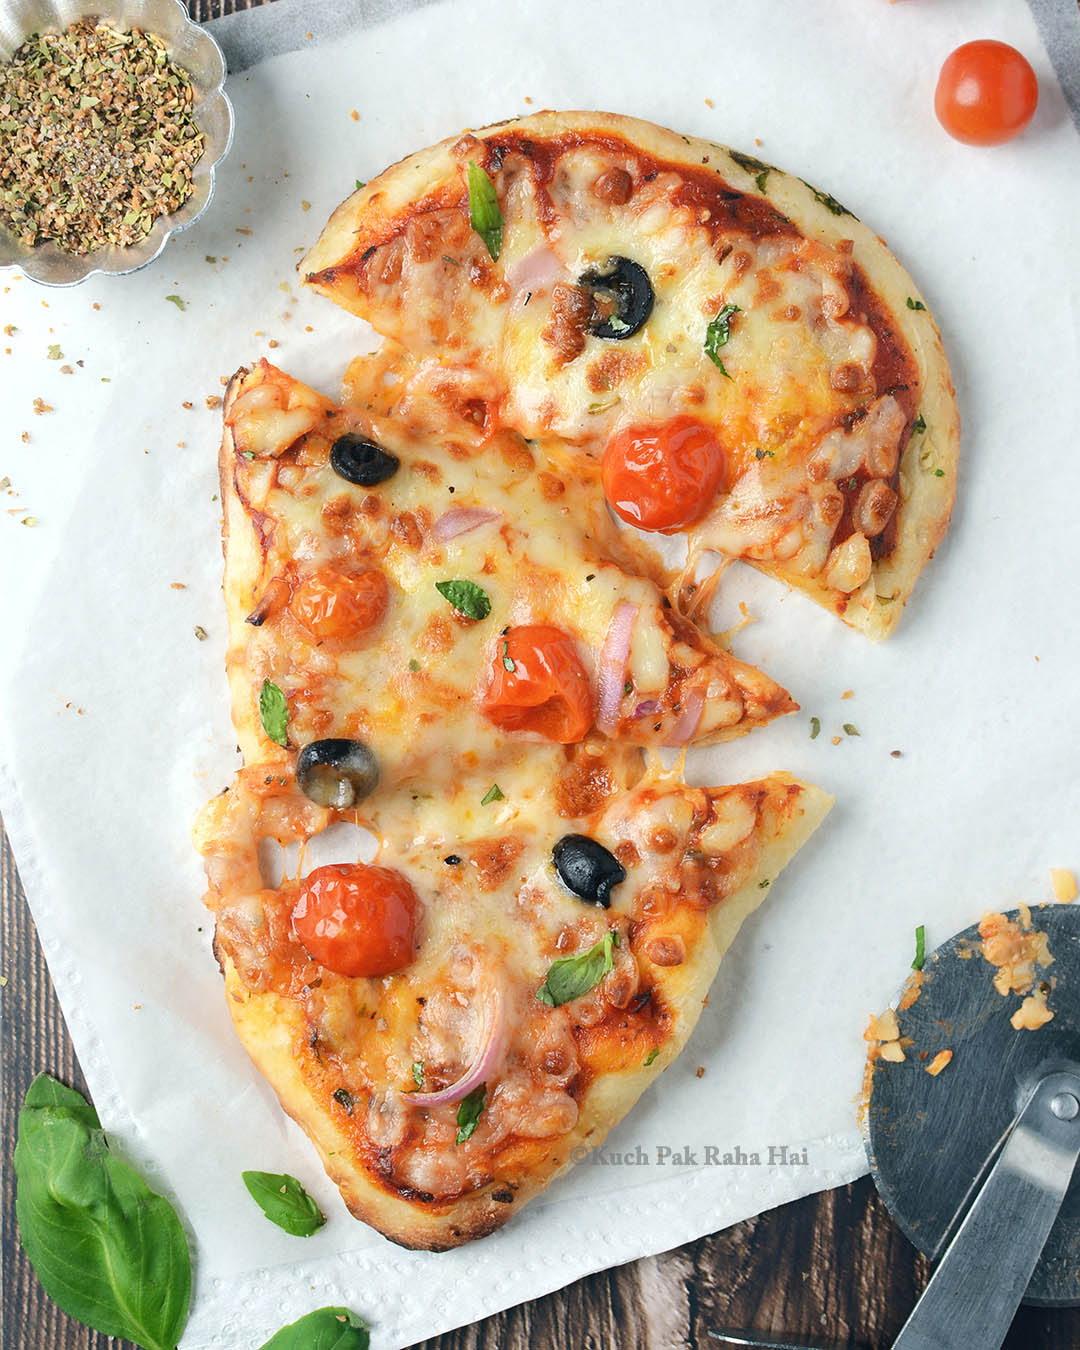 Air fryer naan flatbread pizza cut into slices.